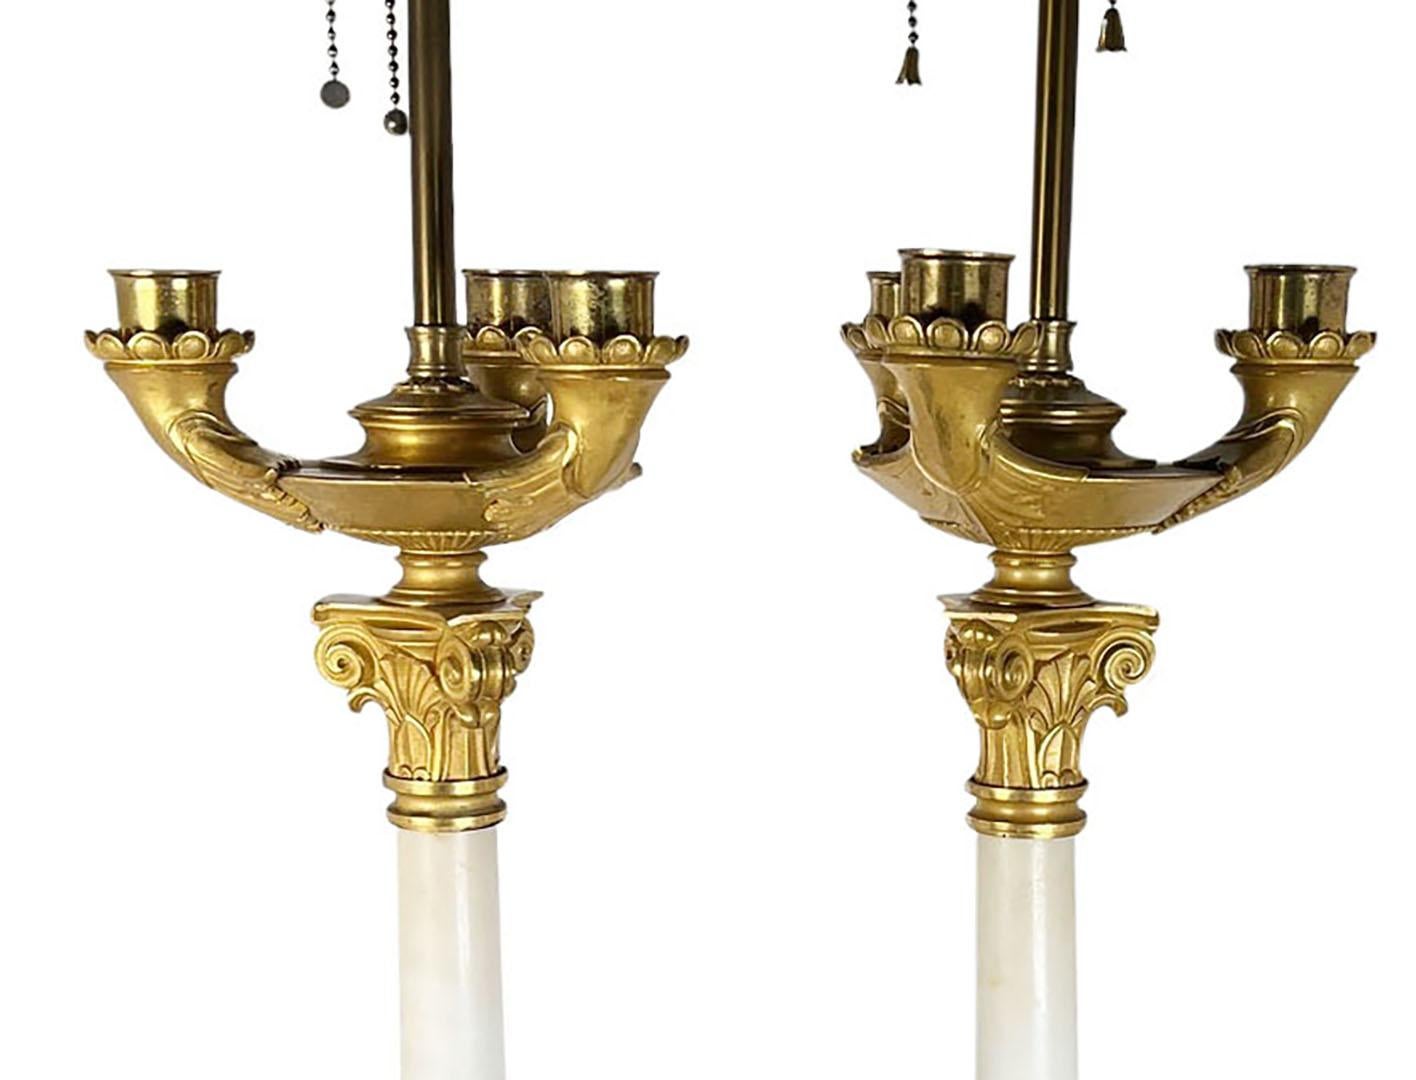 A pair of empire style candelabra with white Carrera marble and bronze dore mounts. Circa 1900, France. 